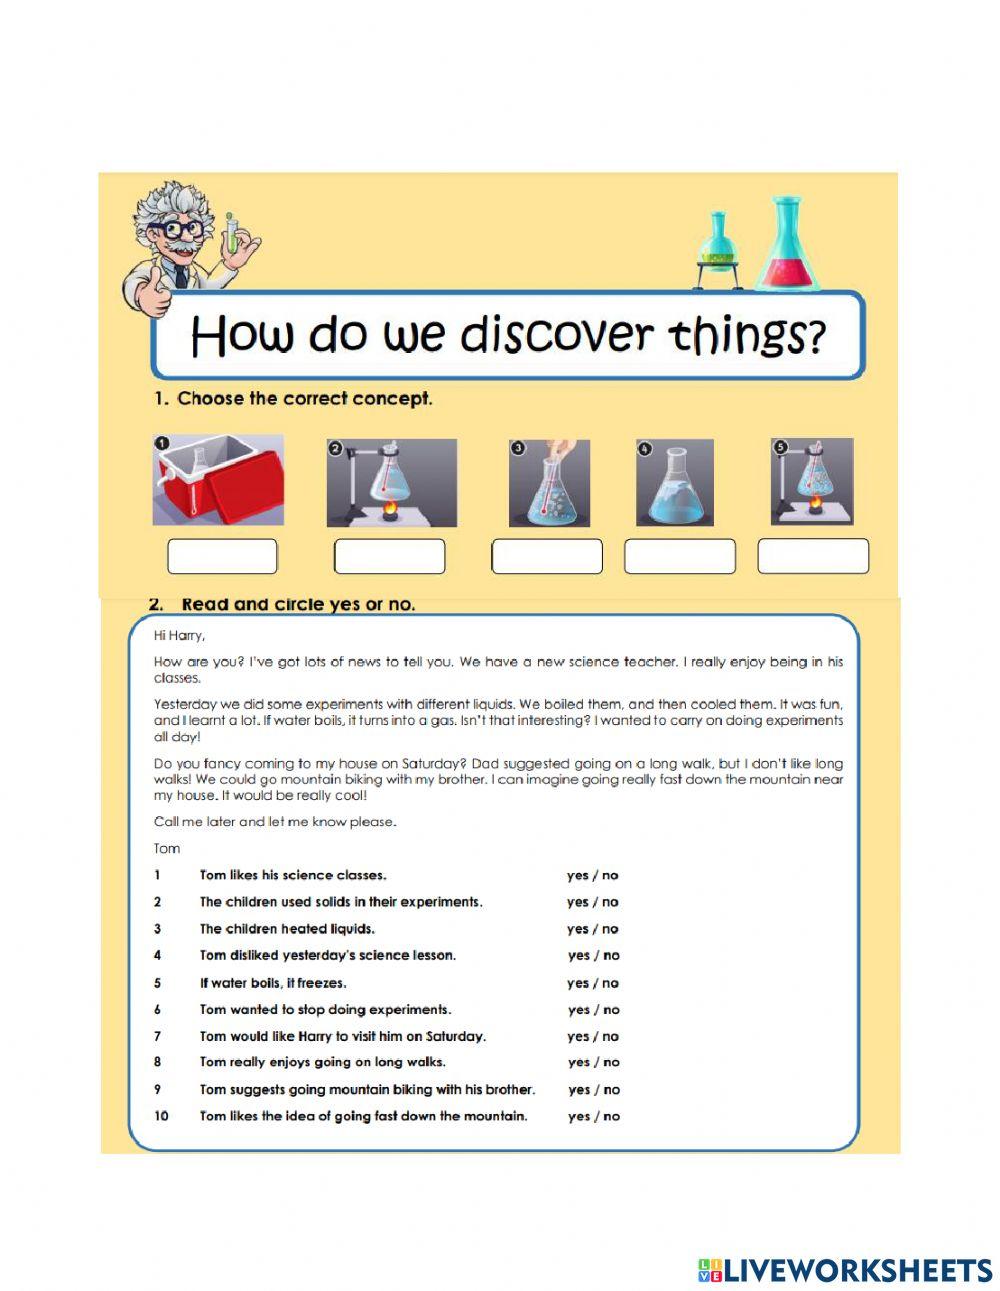 Science - how do we discover things?